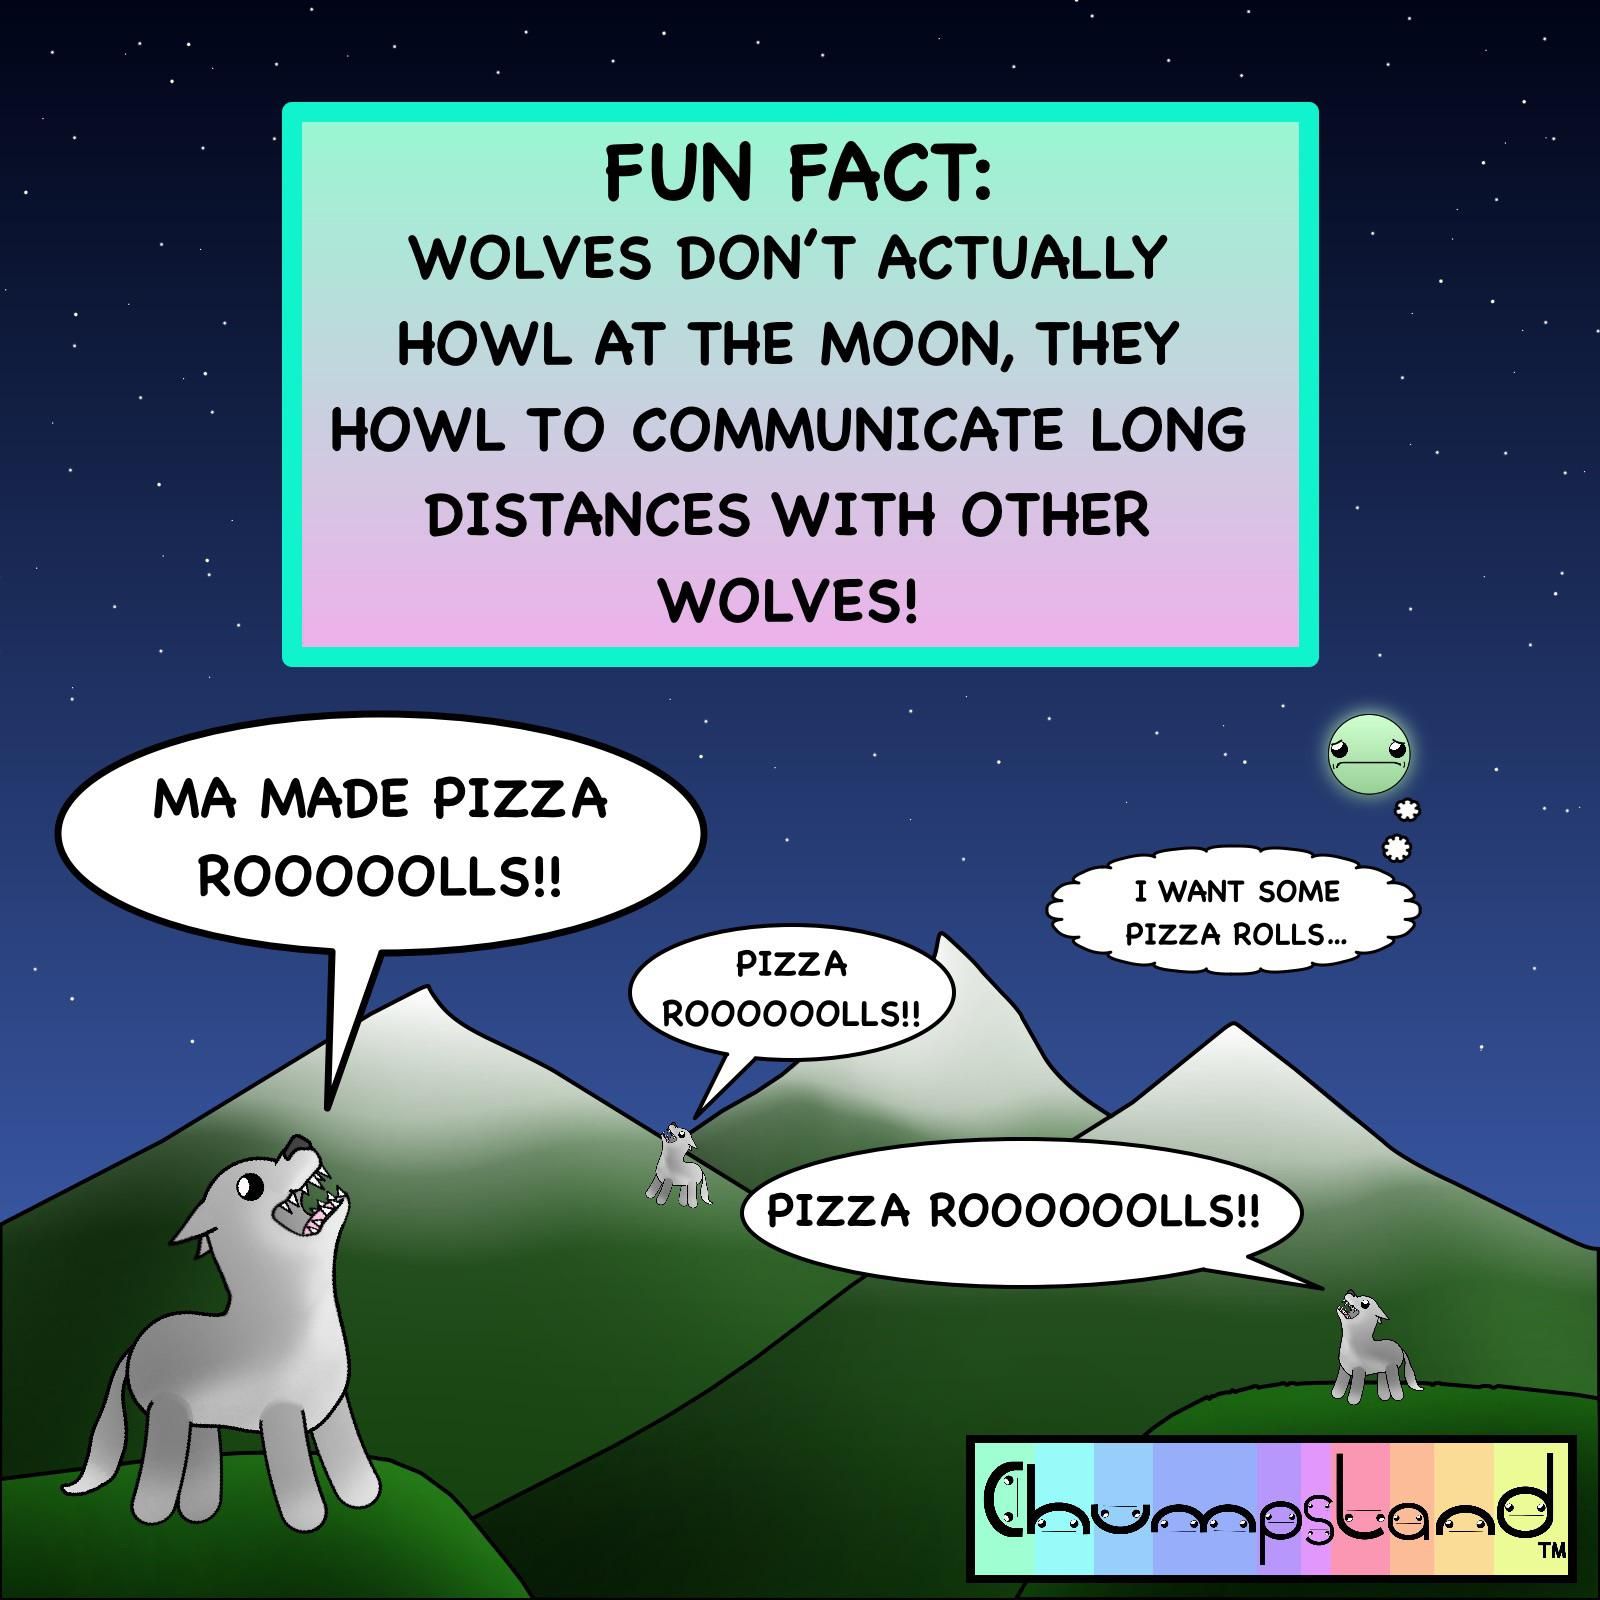 A Fun Fact About Wolves